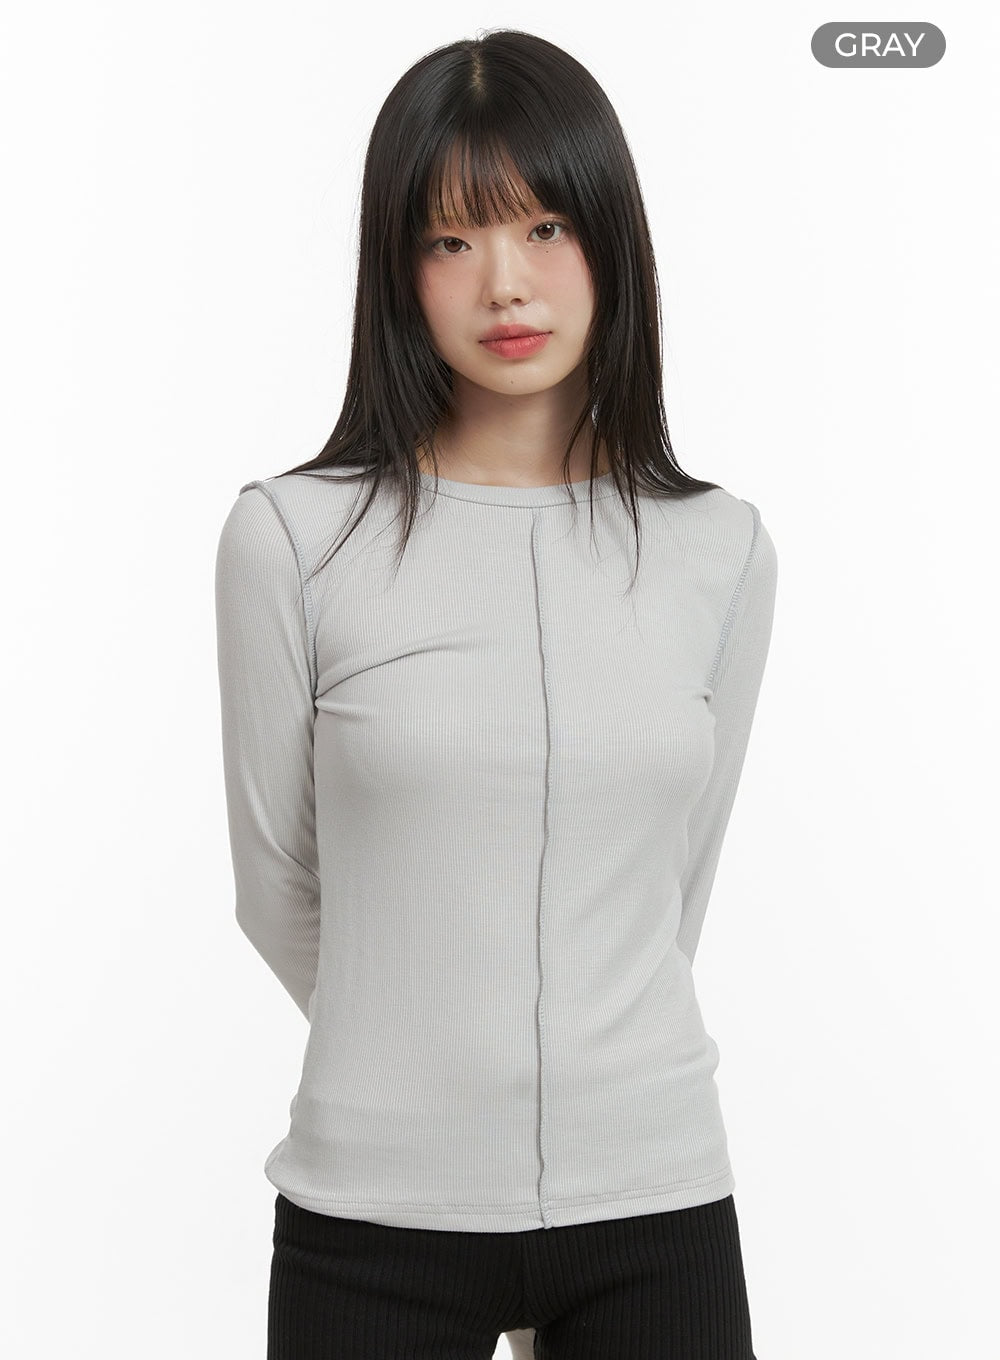 stitching-detail-long-sleeve-cy414 / Gray